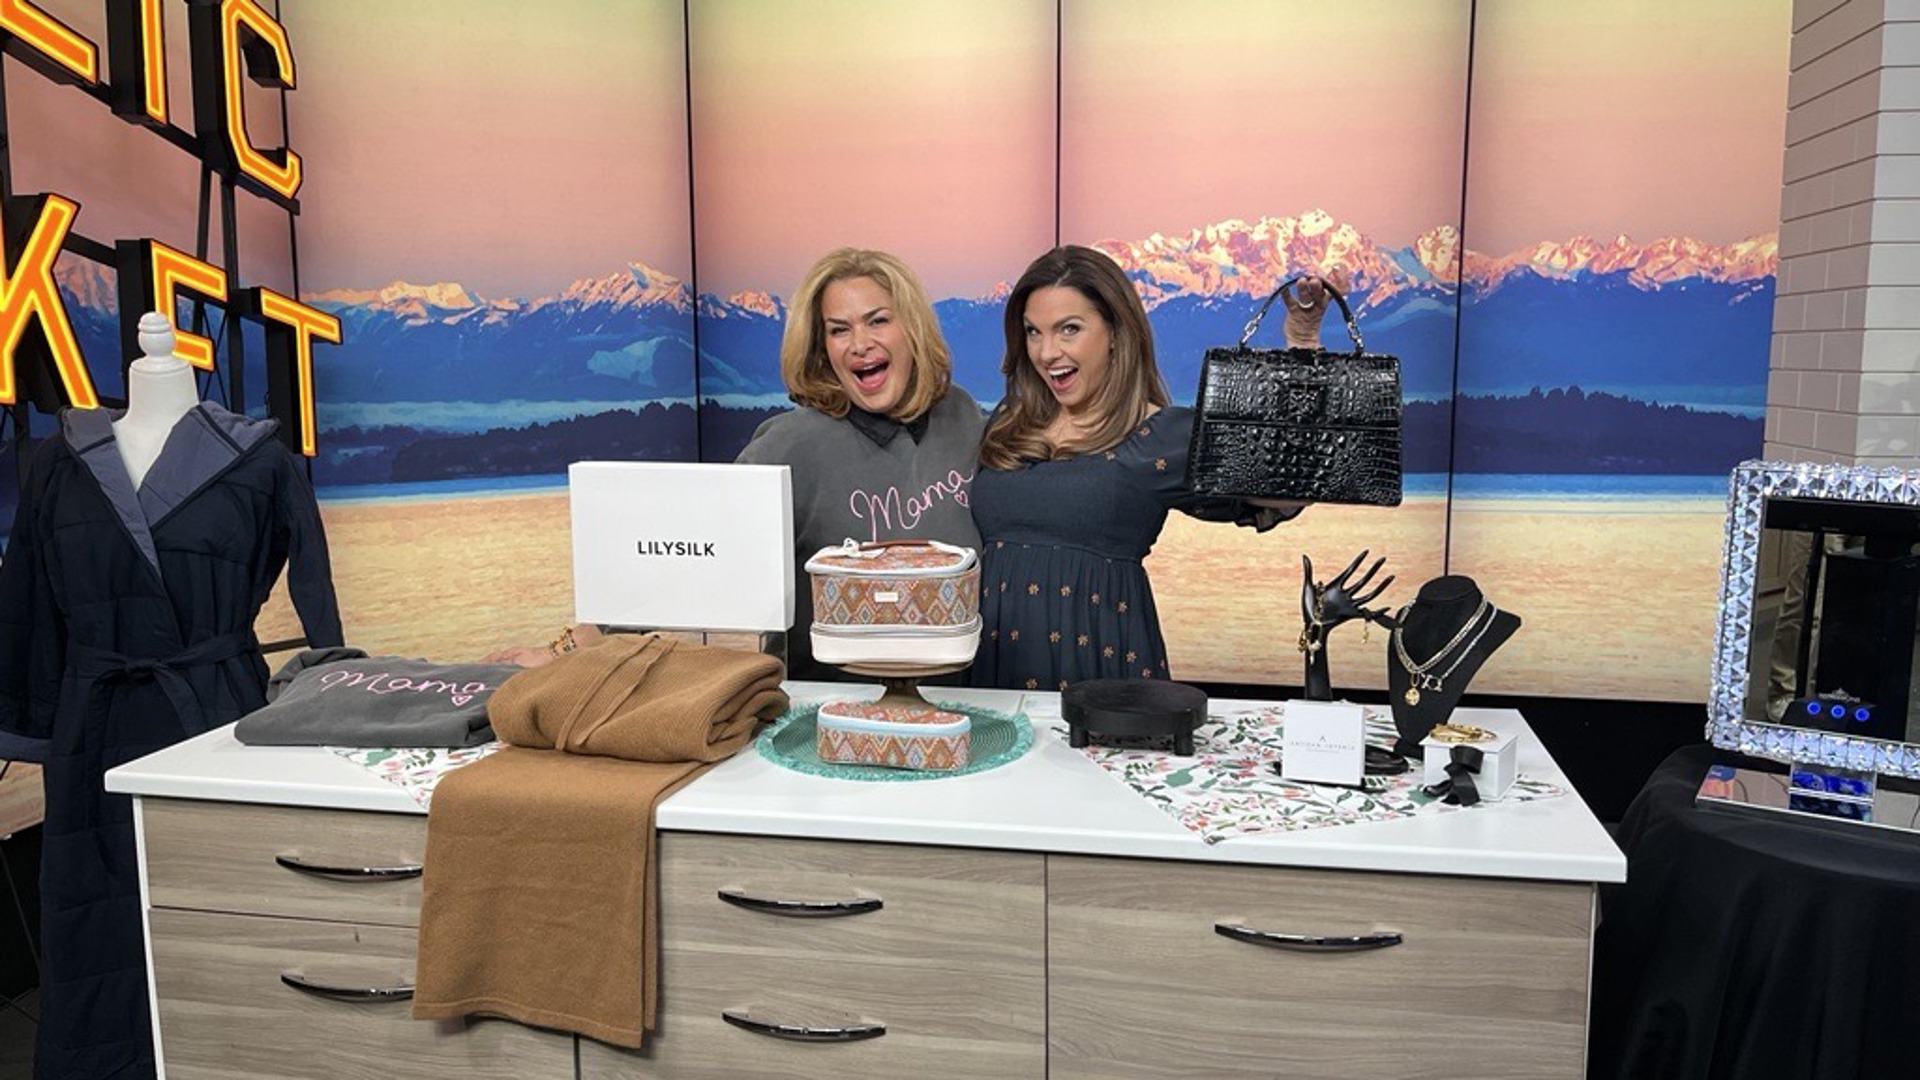 From cozy loungewear to light up vanities you can’t miss with these gift ideas. #newdaynw